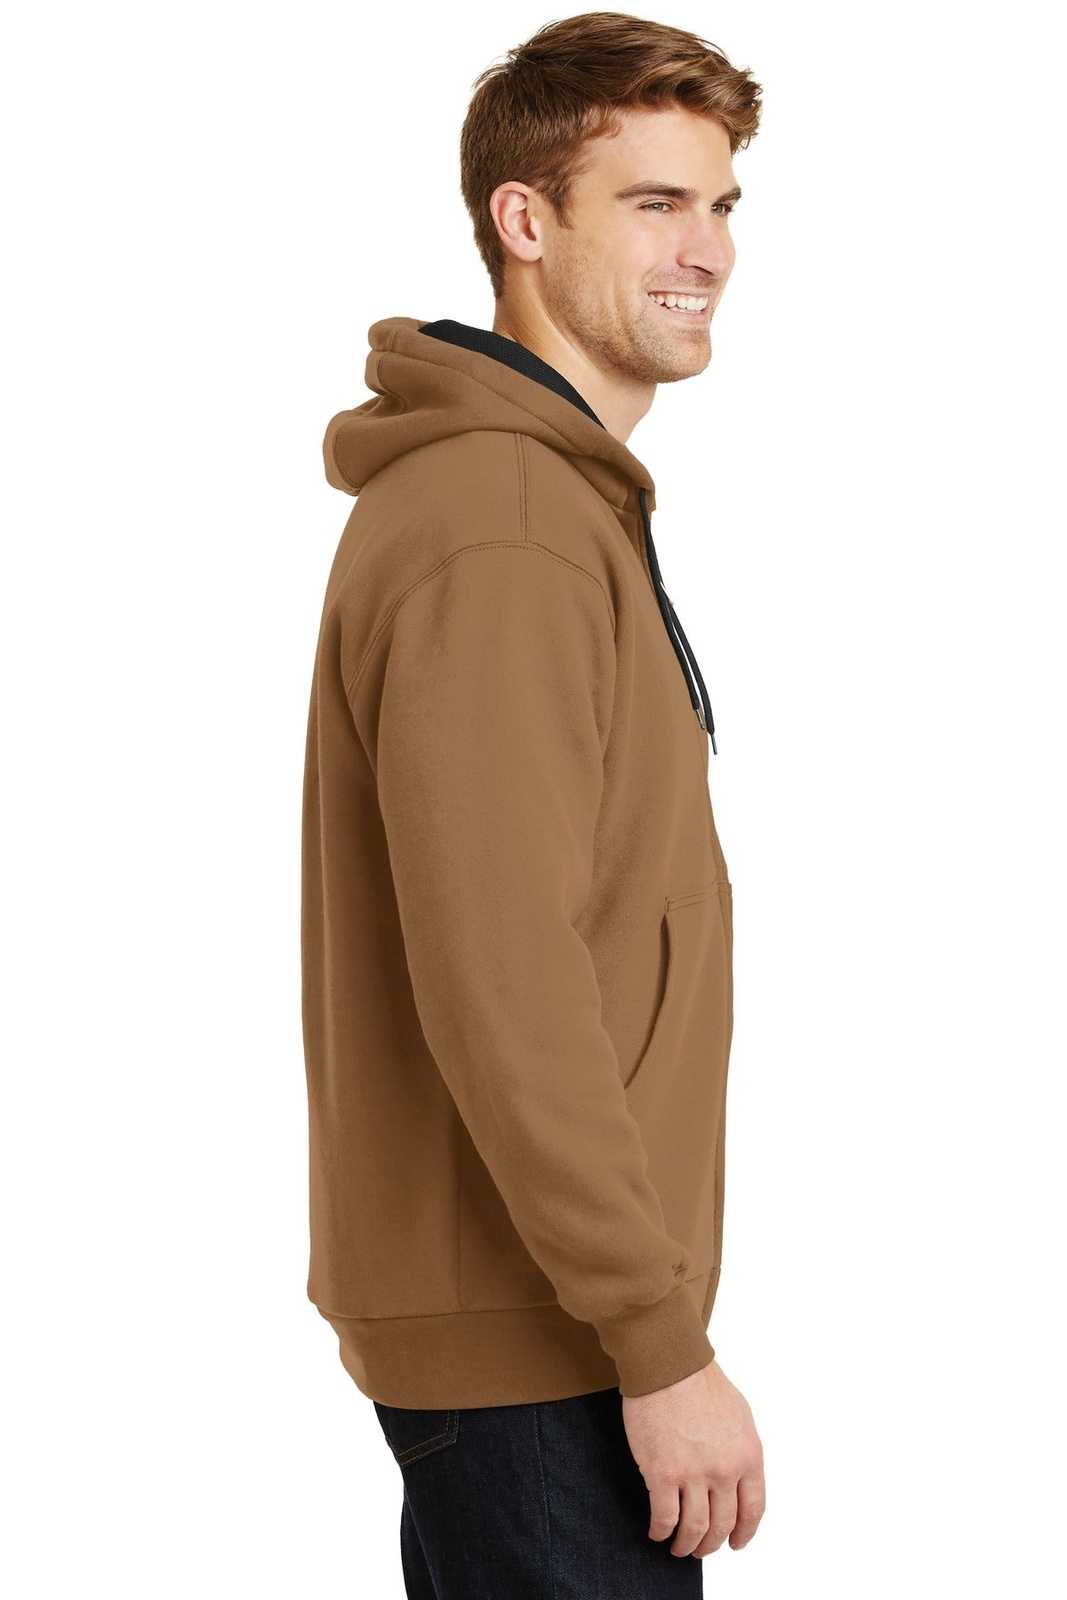 CornerStone CS620 Heavyweight Full-Zip Hooded Sweatshirt with Thermal Lining - Duck Brown - HIT a Double - 3